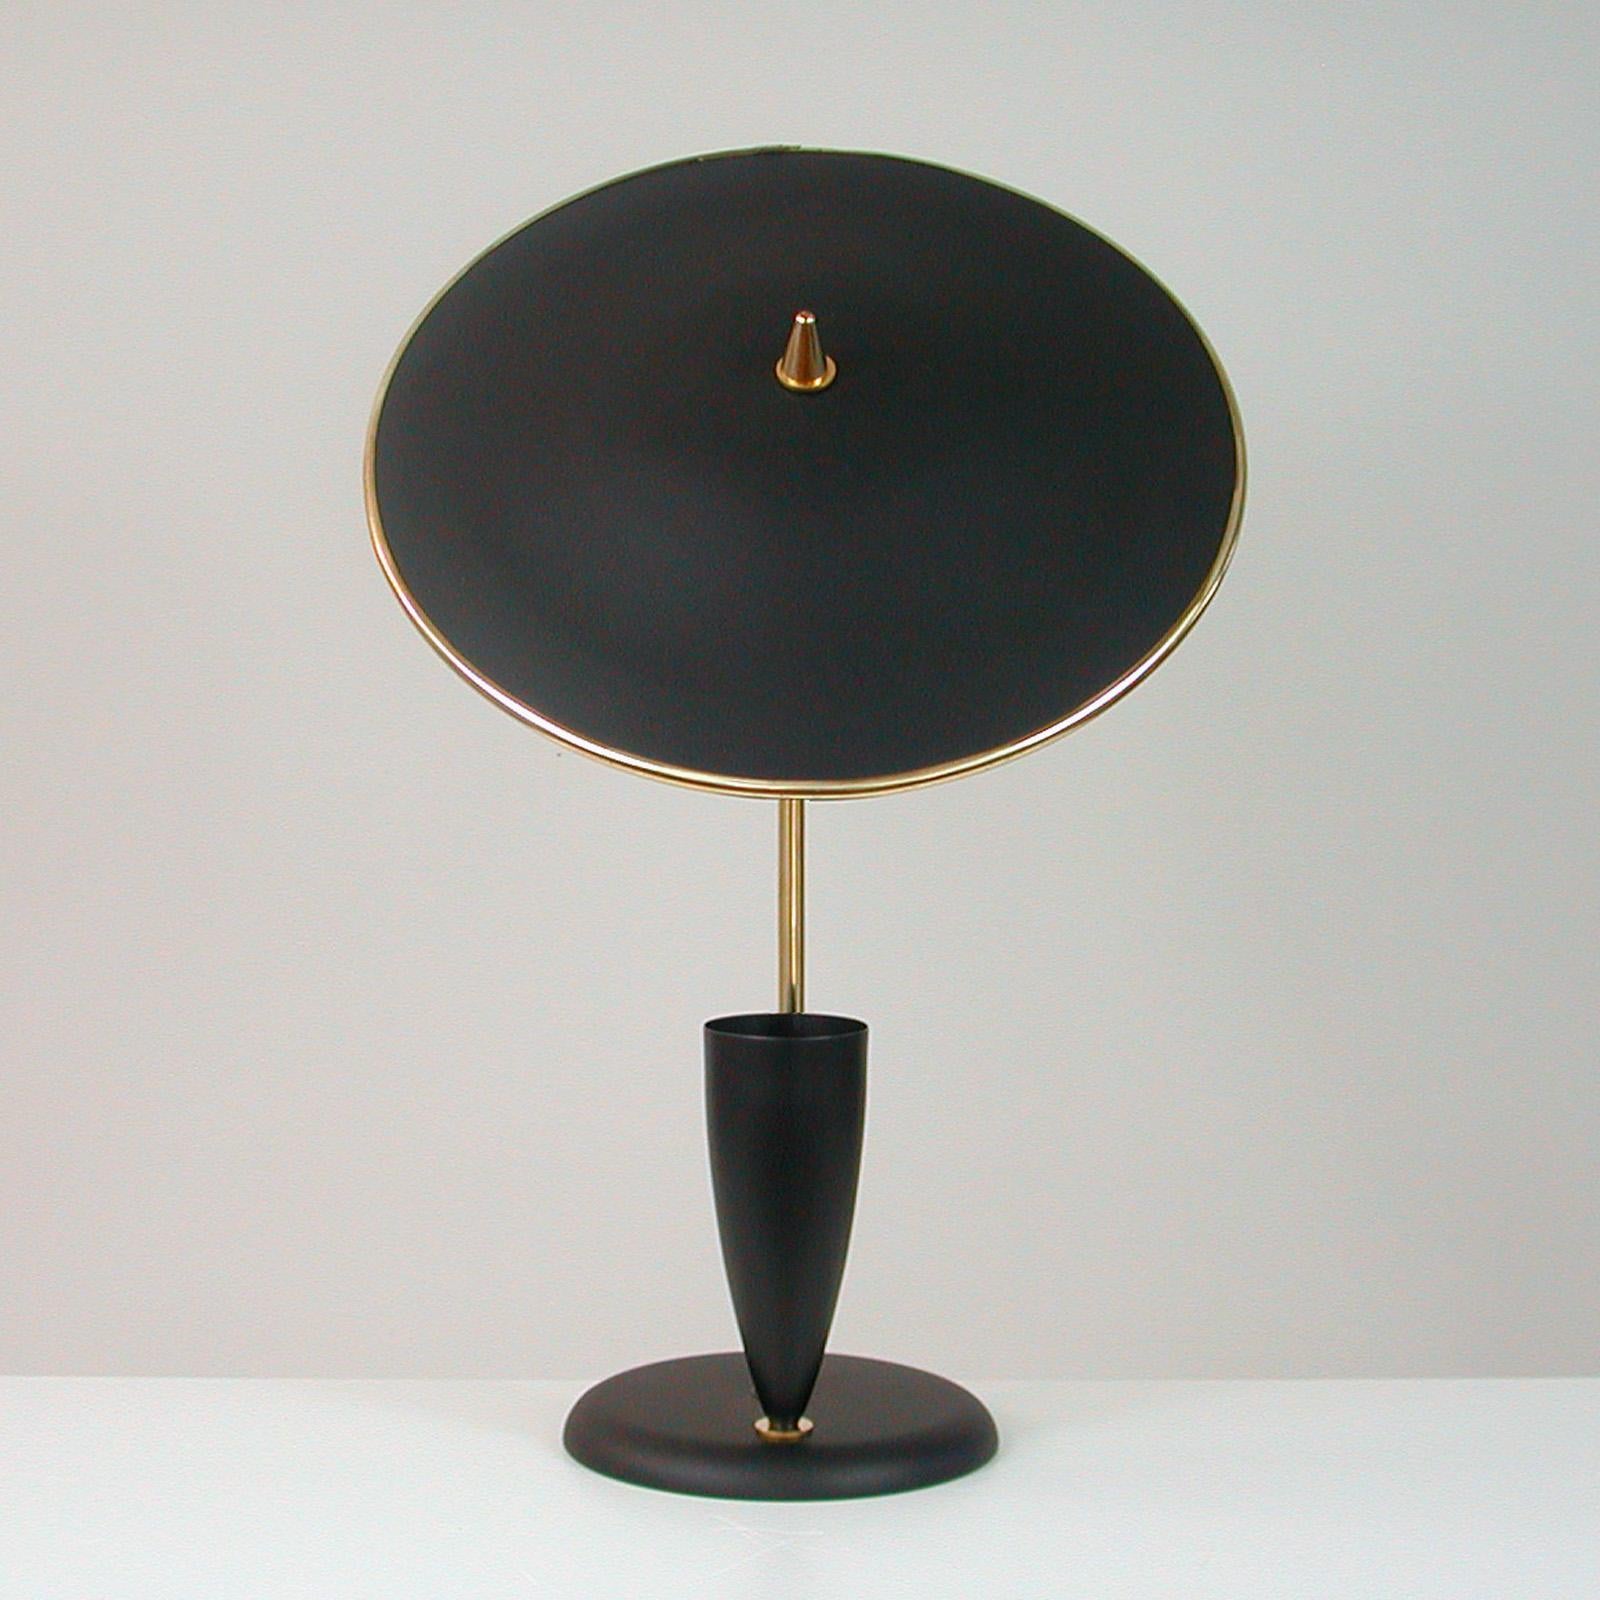 This elegant Maison Arlus style table light was designed and manufactured in France in the 1950s.

It features a black adjustable reflecting lampshade, a brass lamp arm and black bulb holder. The rim of the reflecting shade made of brass too. The